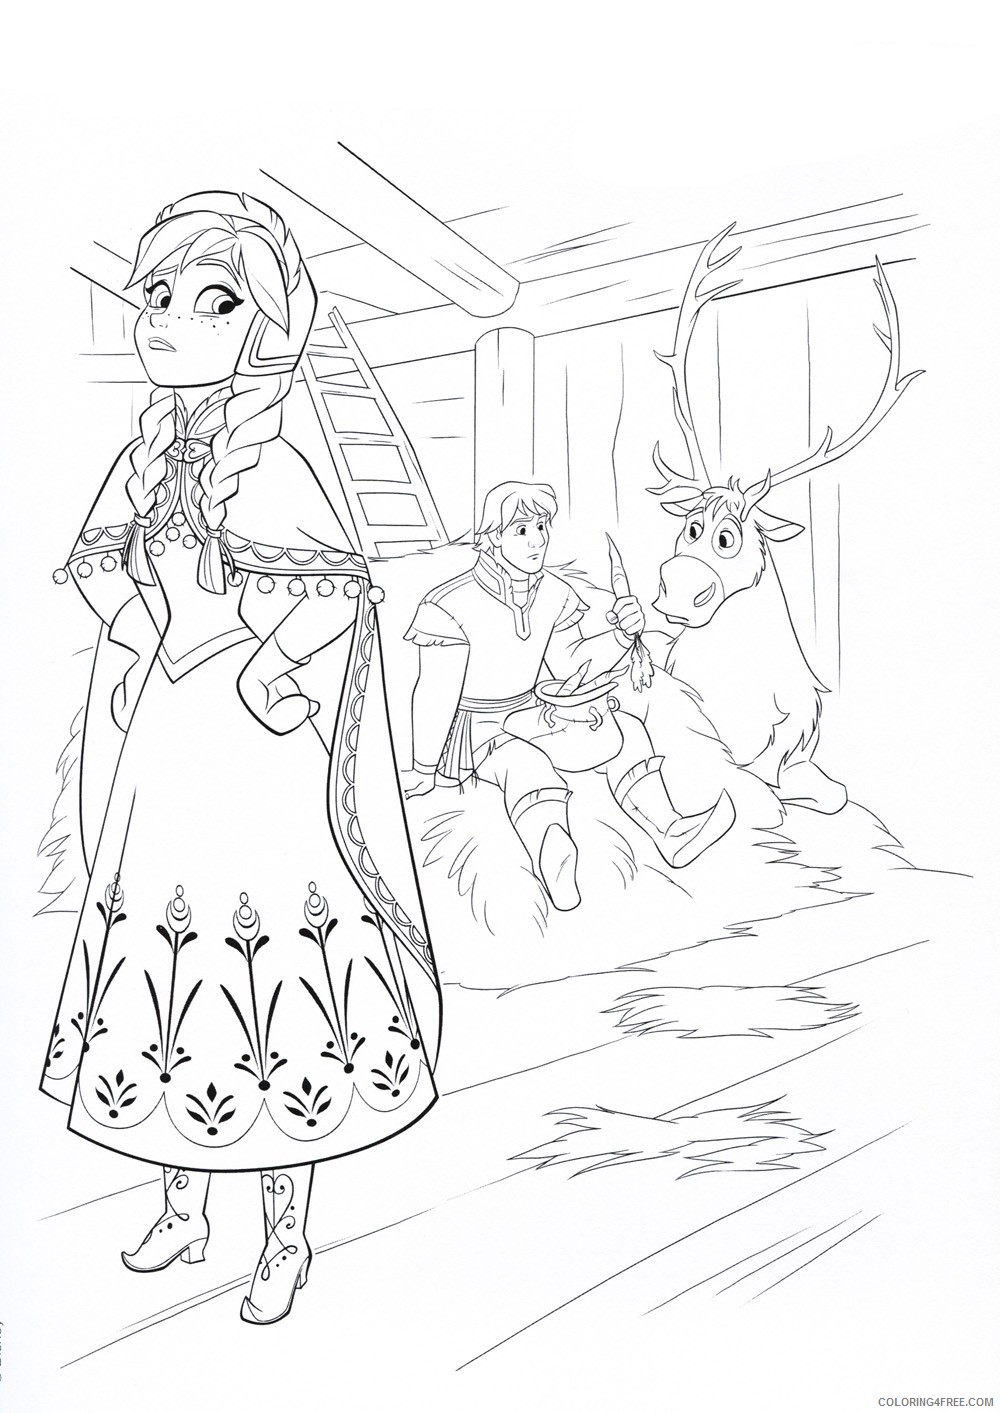 anna coloring pages with kristoff and sven Coloring4free